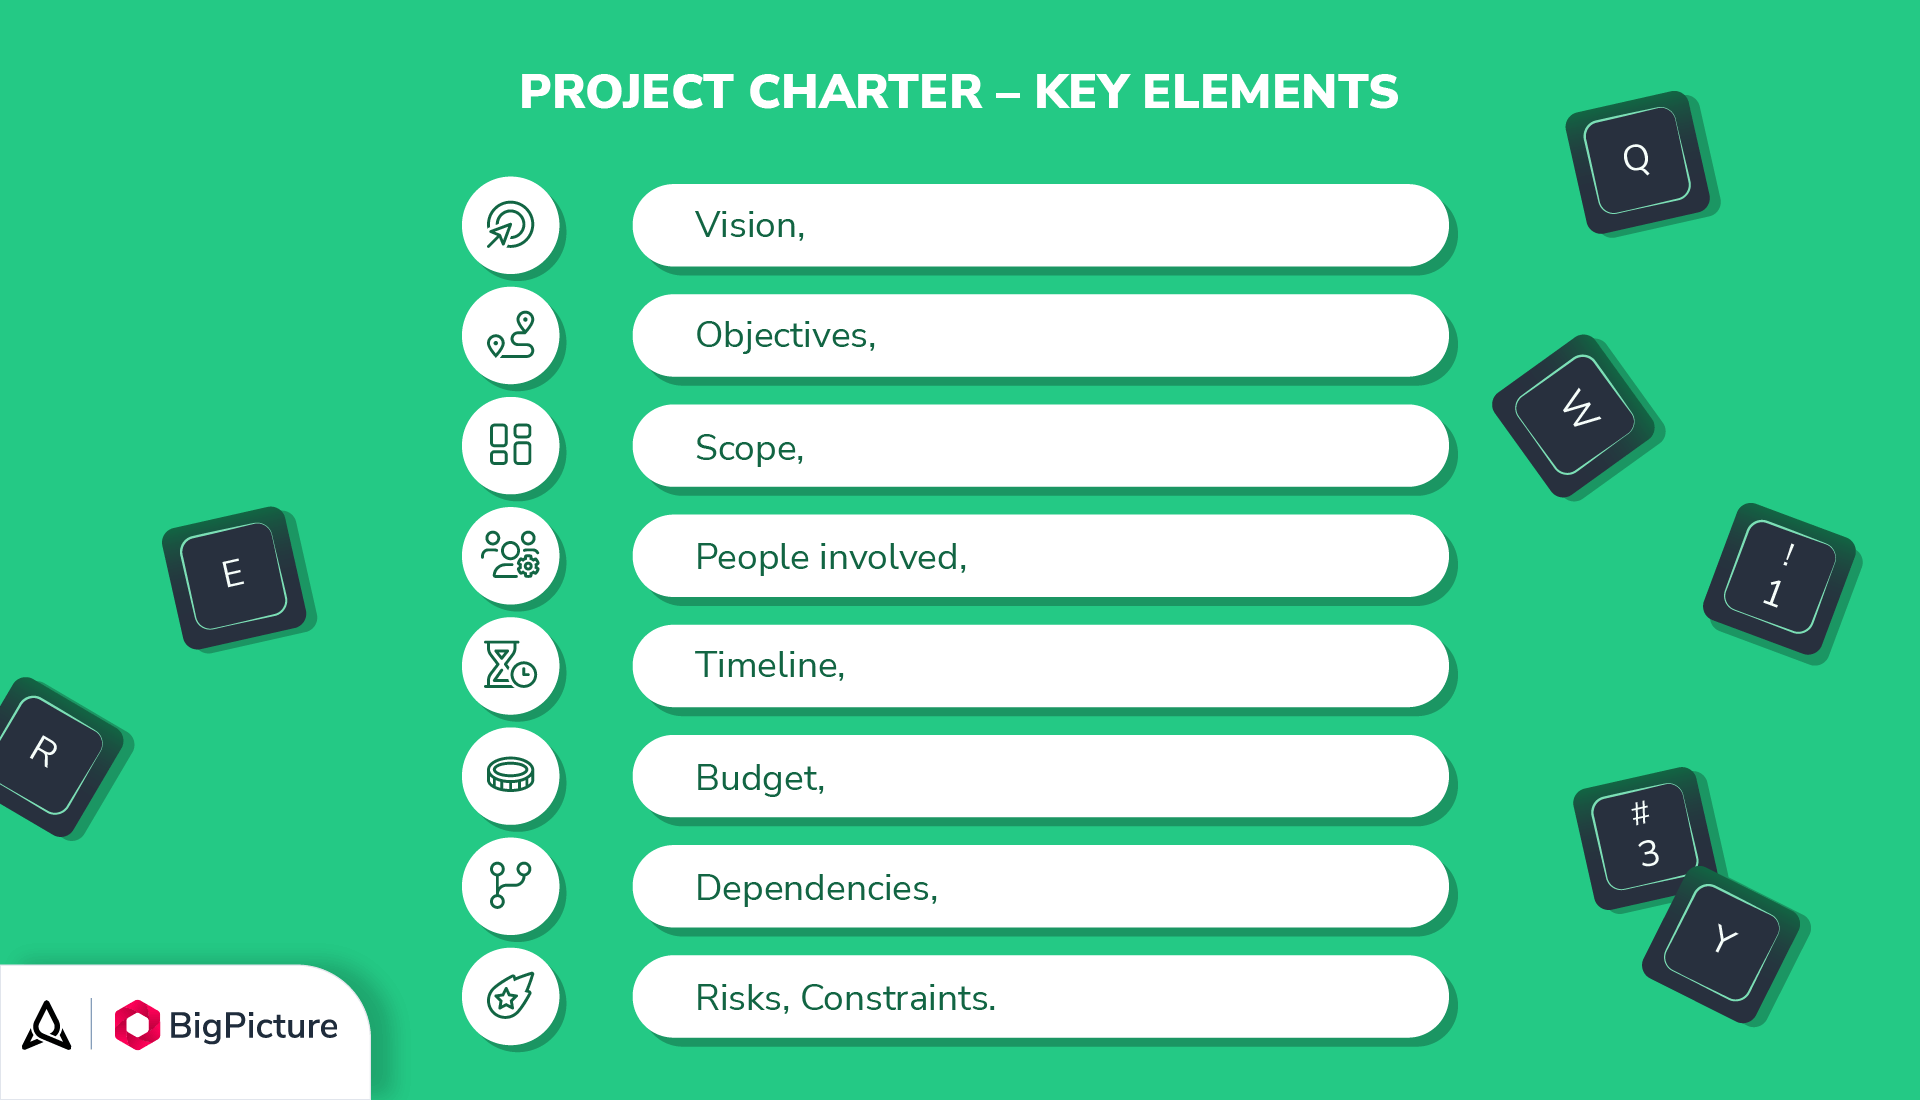 A list of key elements of the project charter